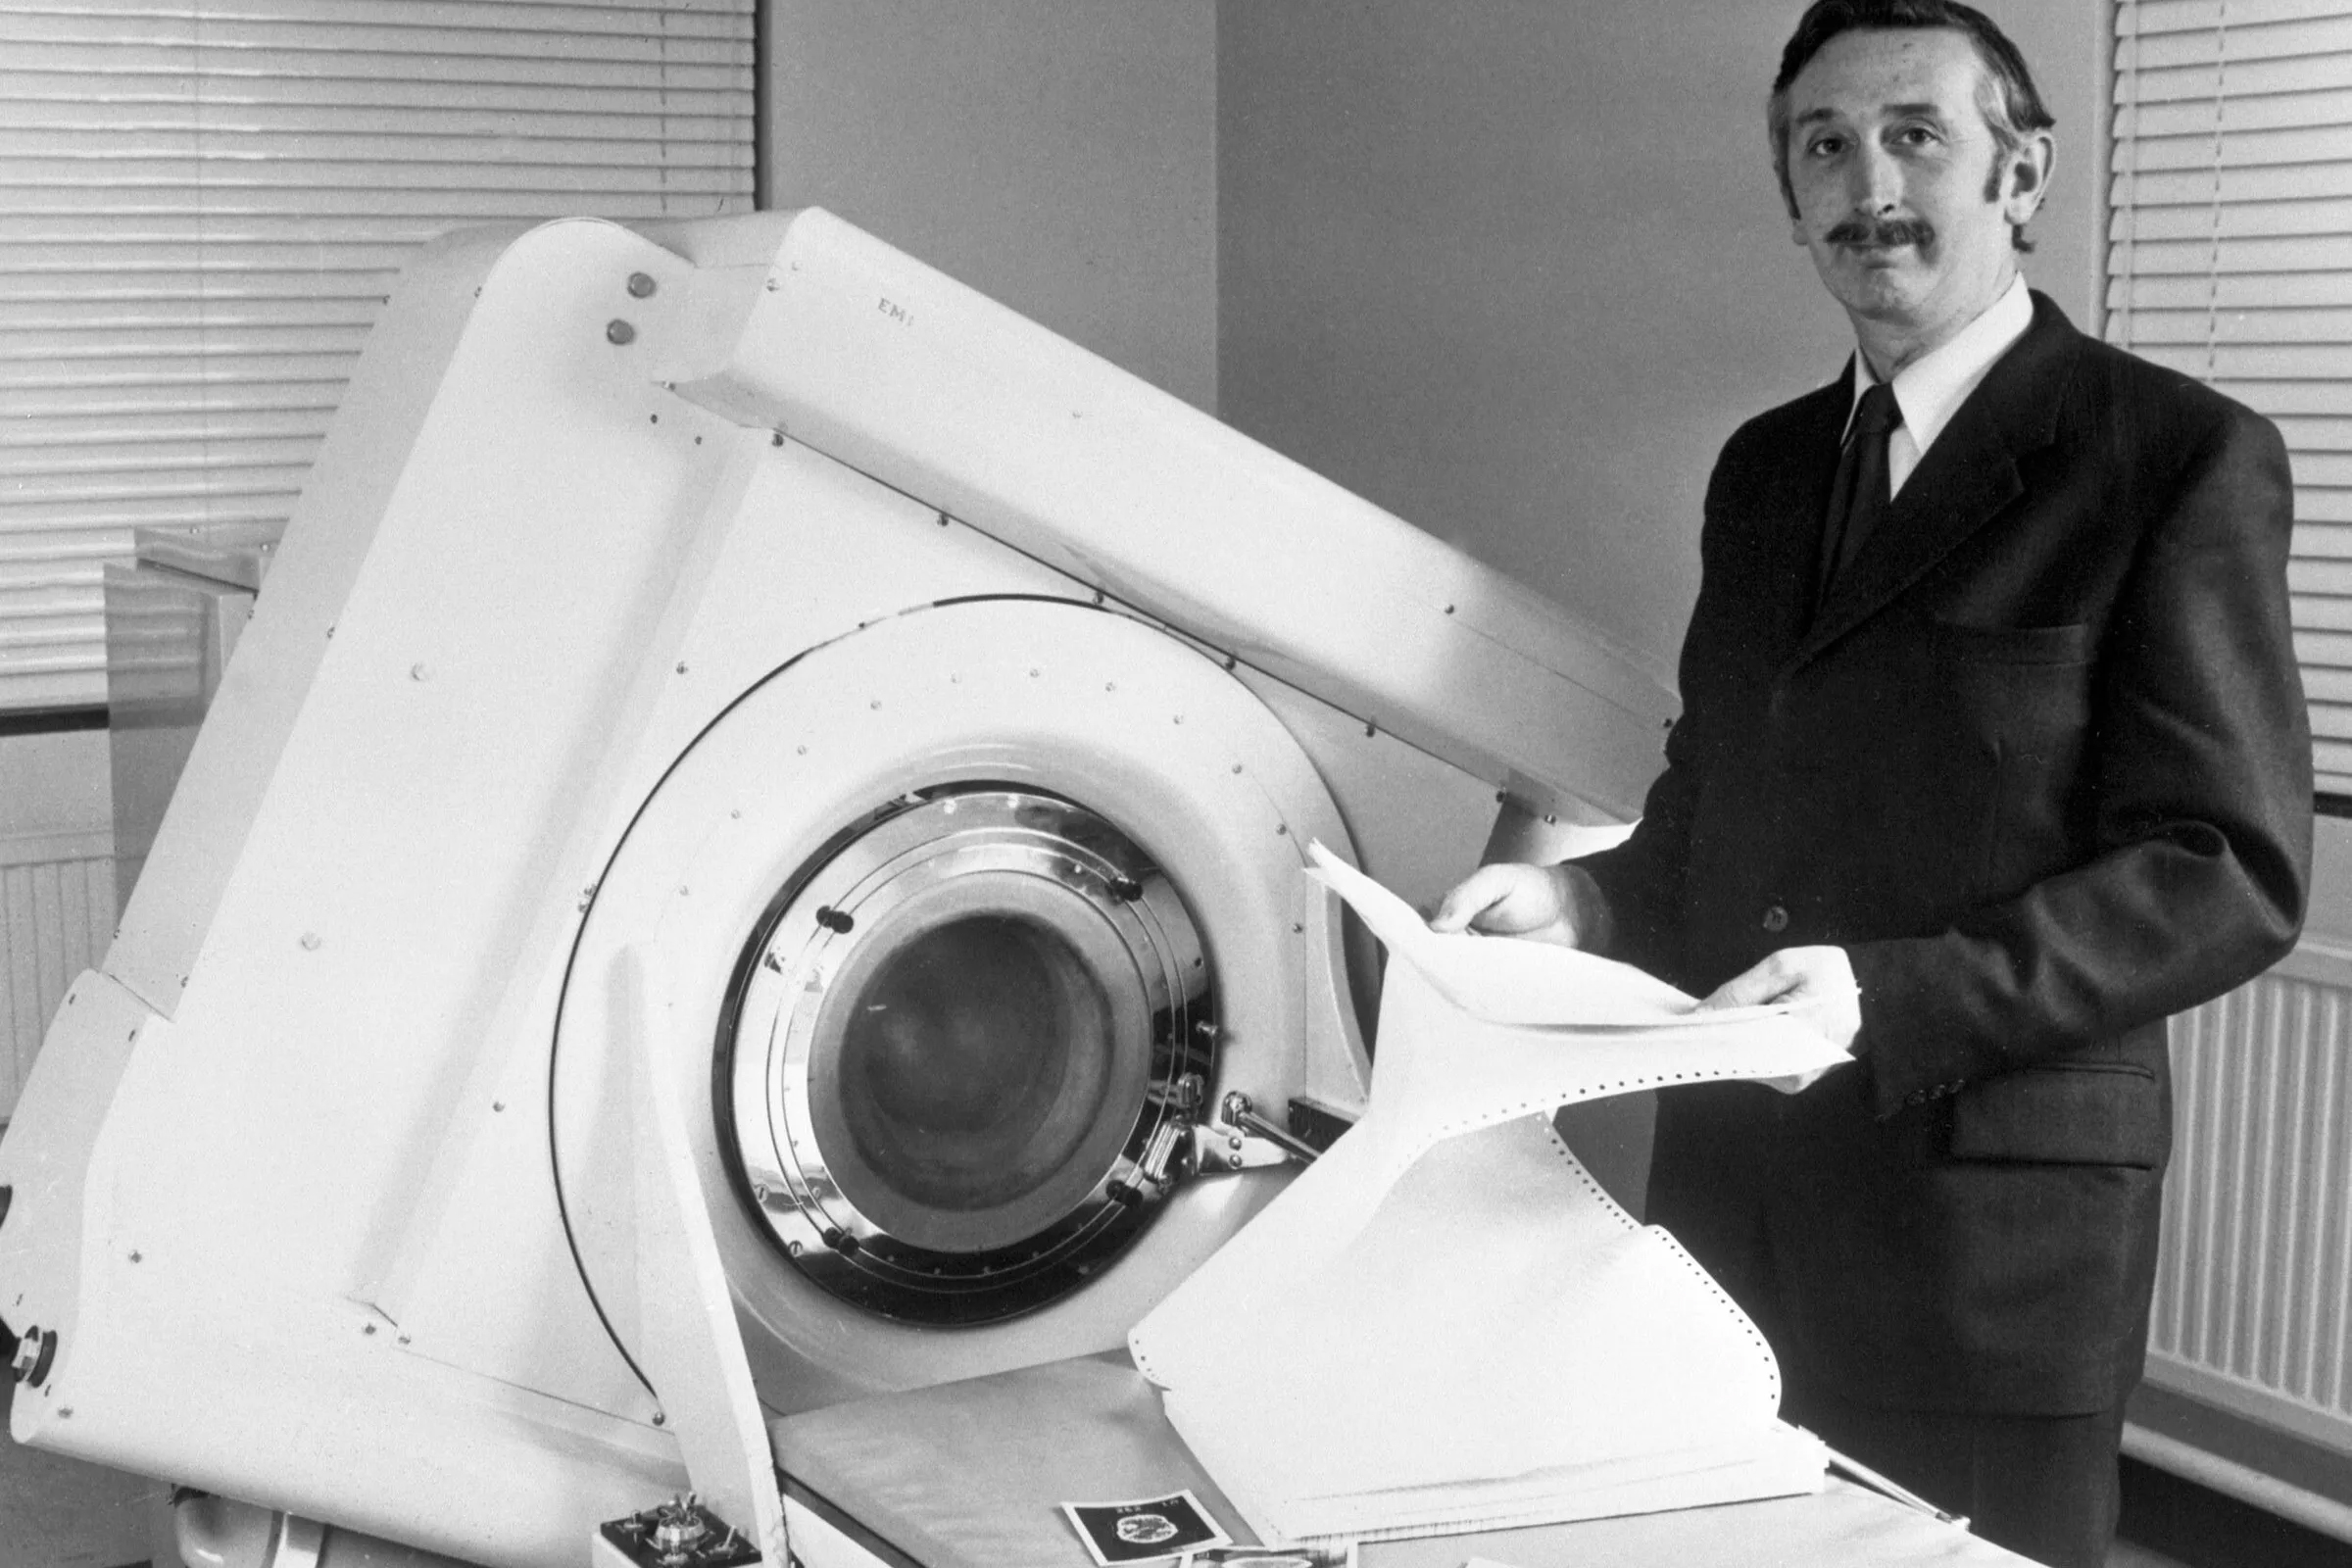 Research engineer Godfrey Hounsfield invented the CT scanner to create three-dimensional brain images. Photo of Hounsfield standing next to CT scanner.